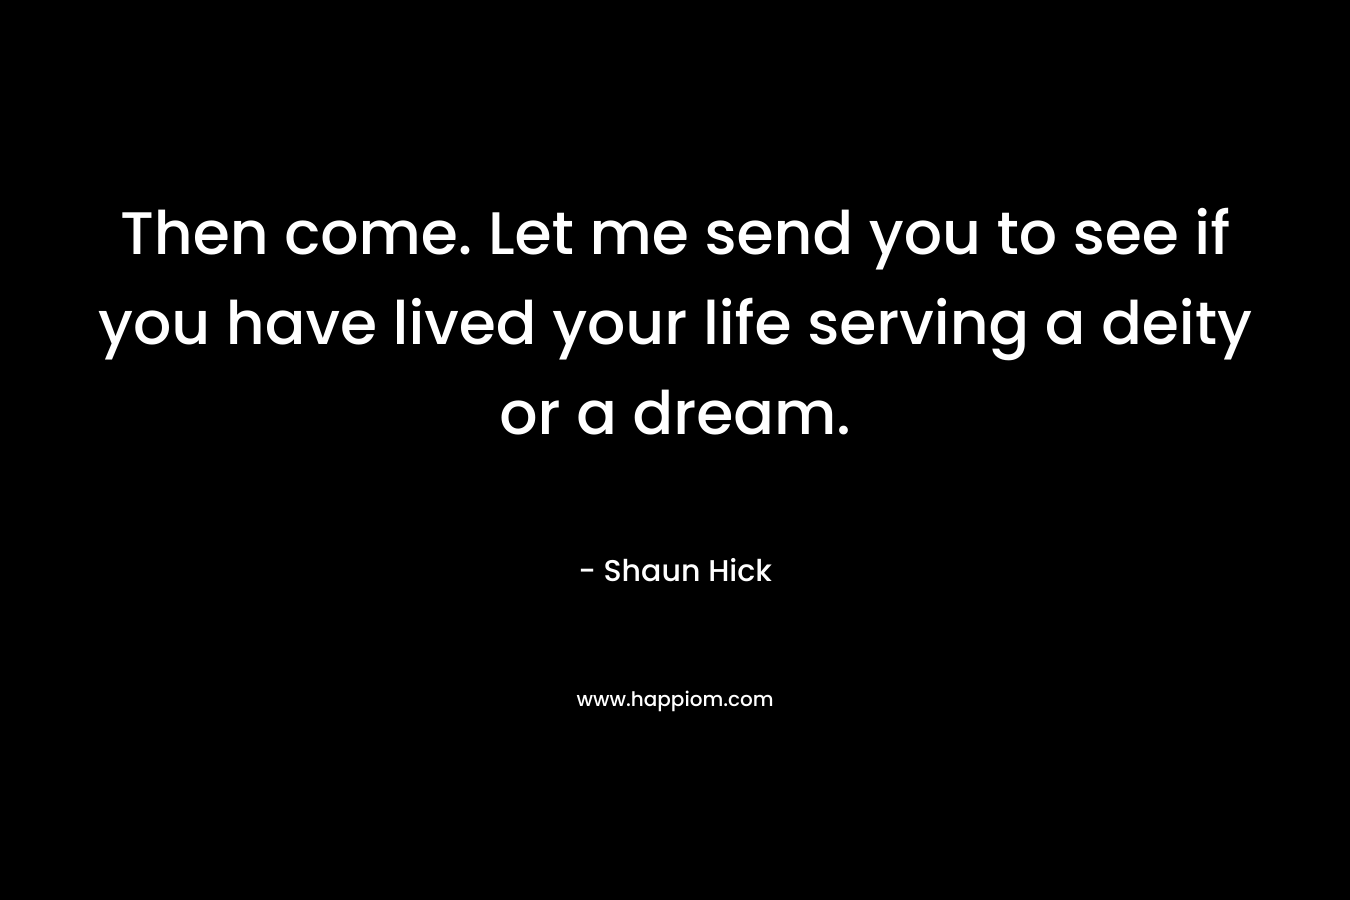 Then come. Let me send you to see if you have lived your life serving a deity or a dream. – Shaun Hick